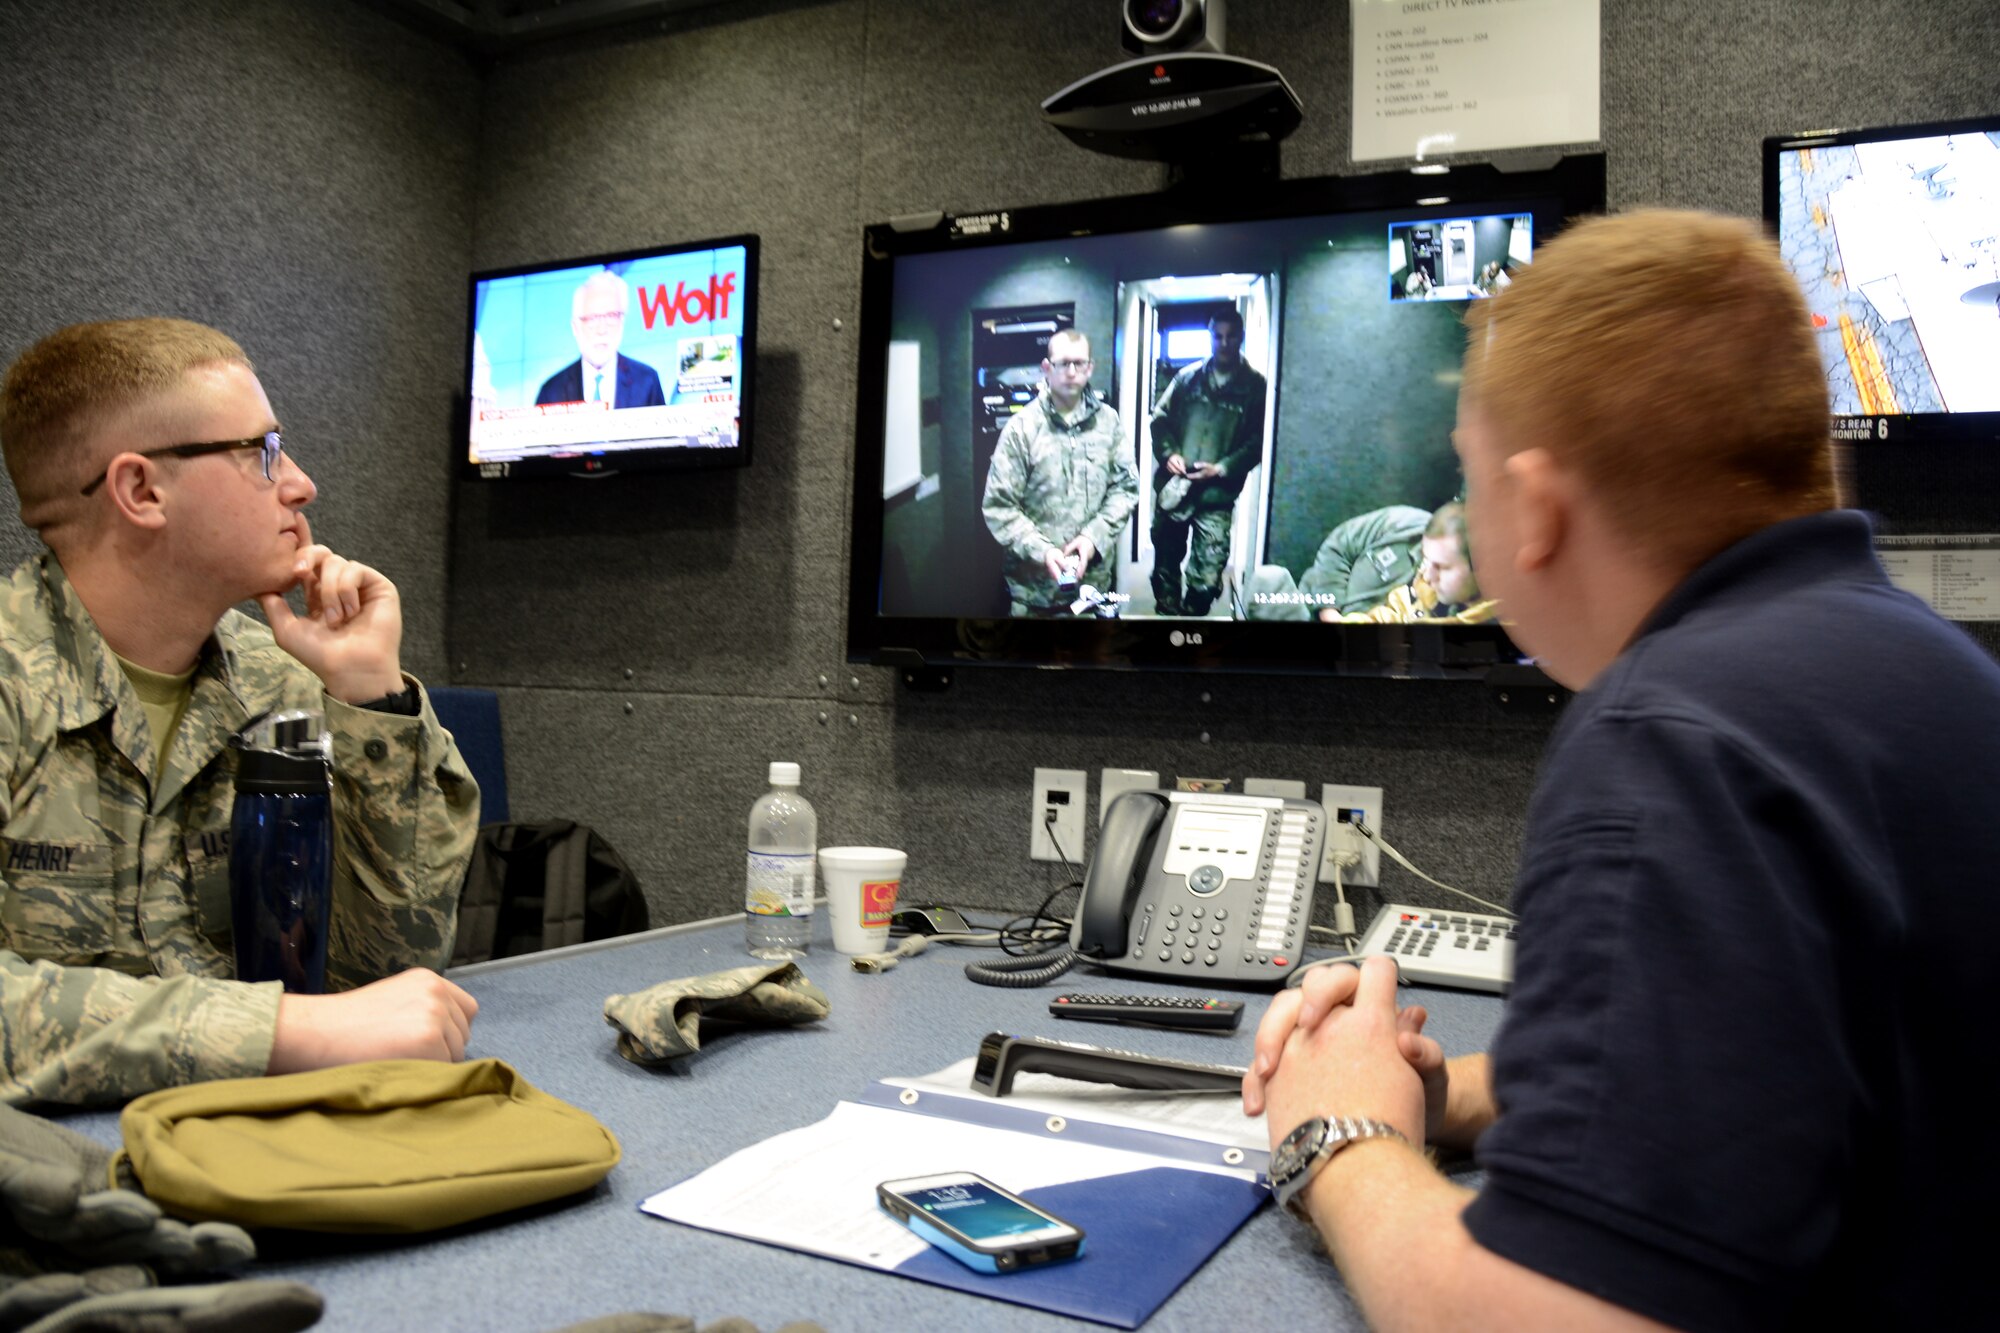 U.S. Air Force Airman First Class Bradley Henry, radio frequency system operator for the 156th Aeromedical Evacuation Squadron and Mark Fow, a contractor with the 145th Airlift Wing Emergency Management, test and administer a video teleconference in the North Carolina Air National Guard, Mobile Emergency Operations Center (MEOC) during a N.C. Command and Communications Rally held in Greensboro, N.C., April 10, 2015. NCANG partnered with more than twenty Emergency Management agencies over a two-day period to test communications during a natural disaster exercise and to showcase each agency’s capabilities. The MEOC provides the community’s incident commanders with emergency response support and interoperable communications such as video-teleconferencing, satellite internet, a weather station, a long range on-scene camera and various radio systems. (U.S. Air National Guard photo by Senior Airman Laura Montgomery, 145th Public Affairs/Released)